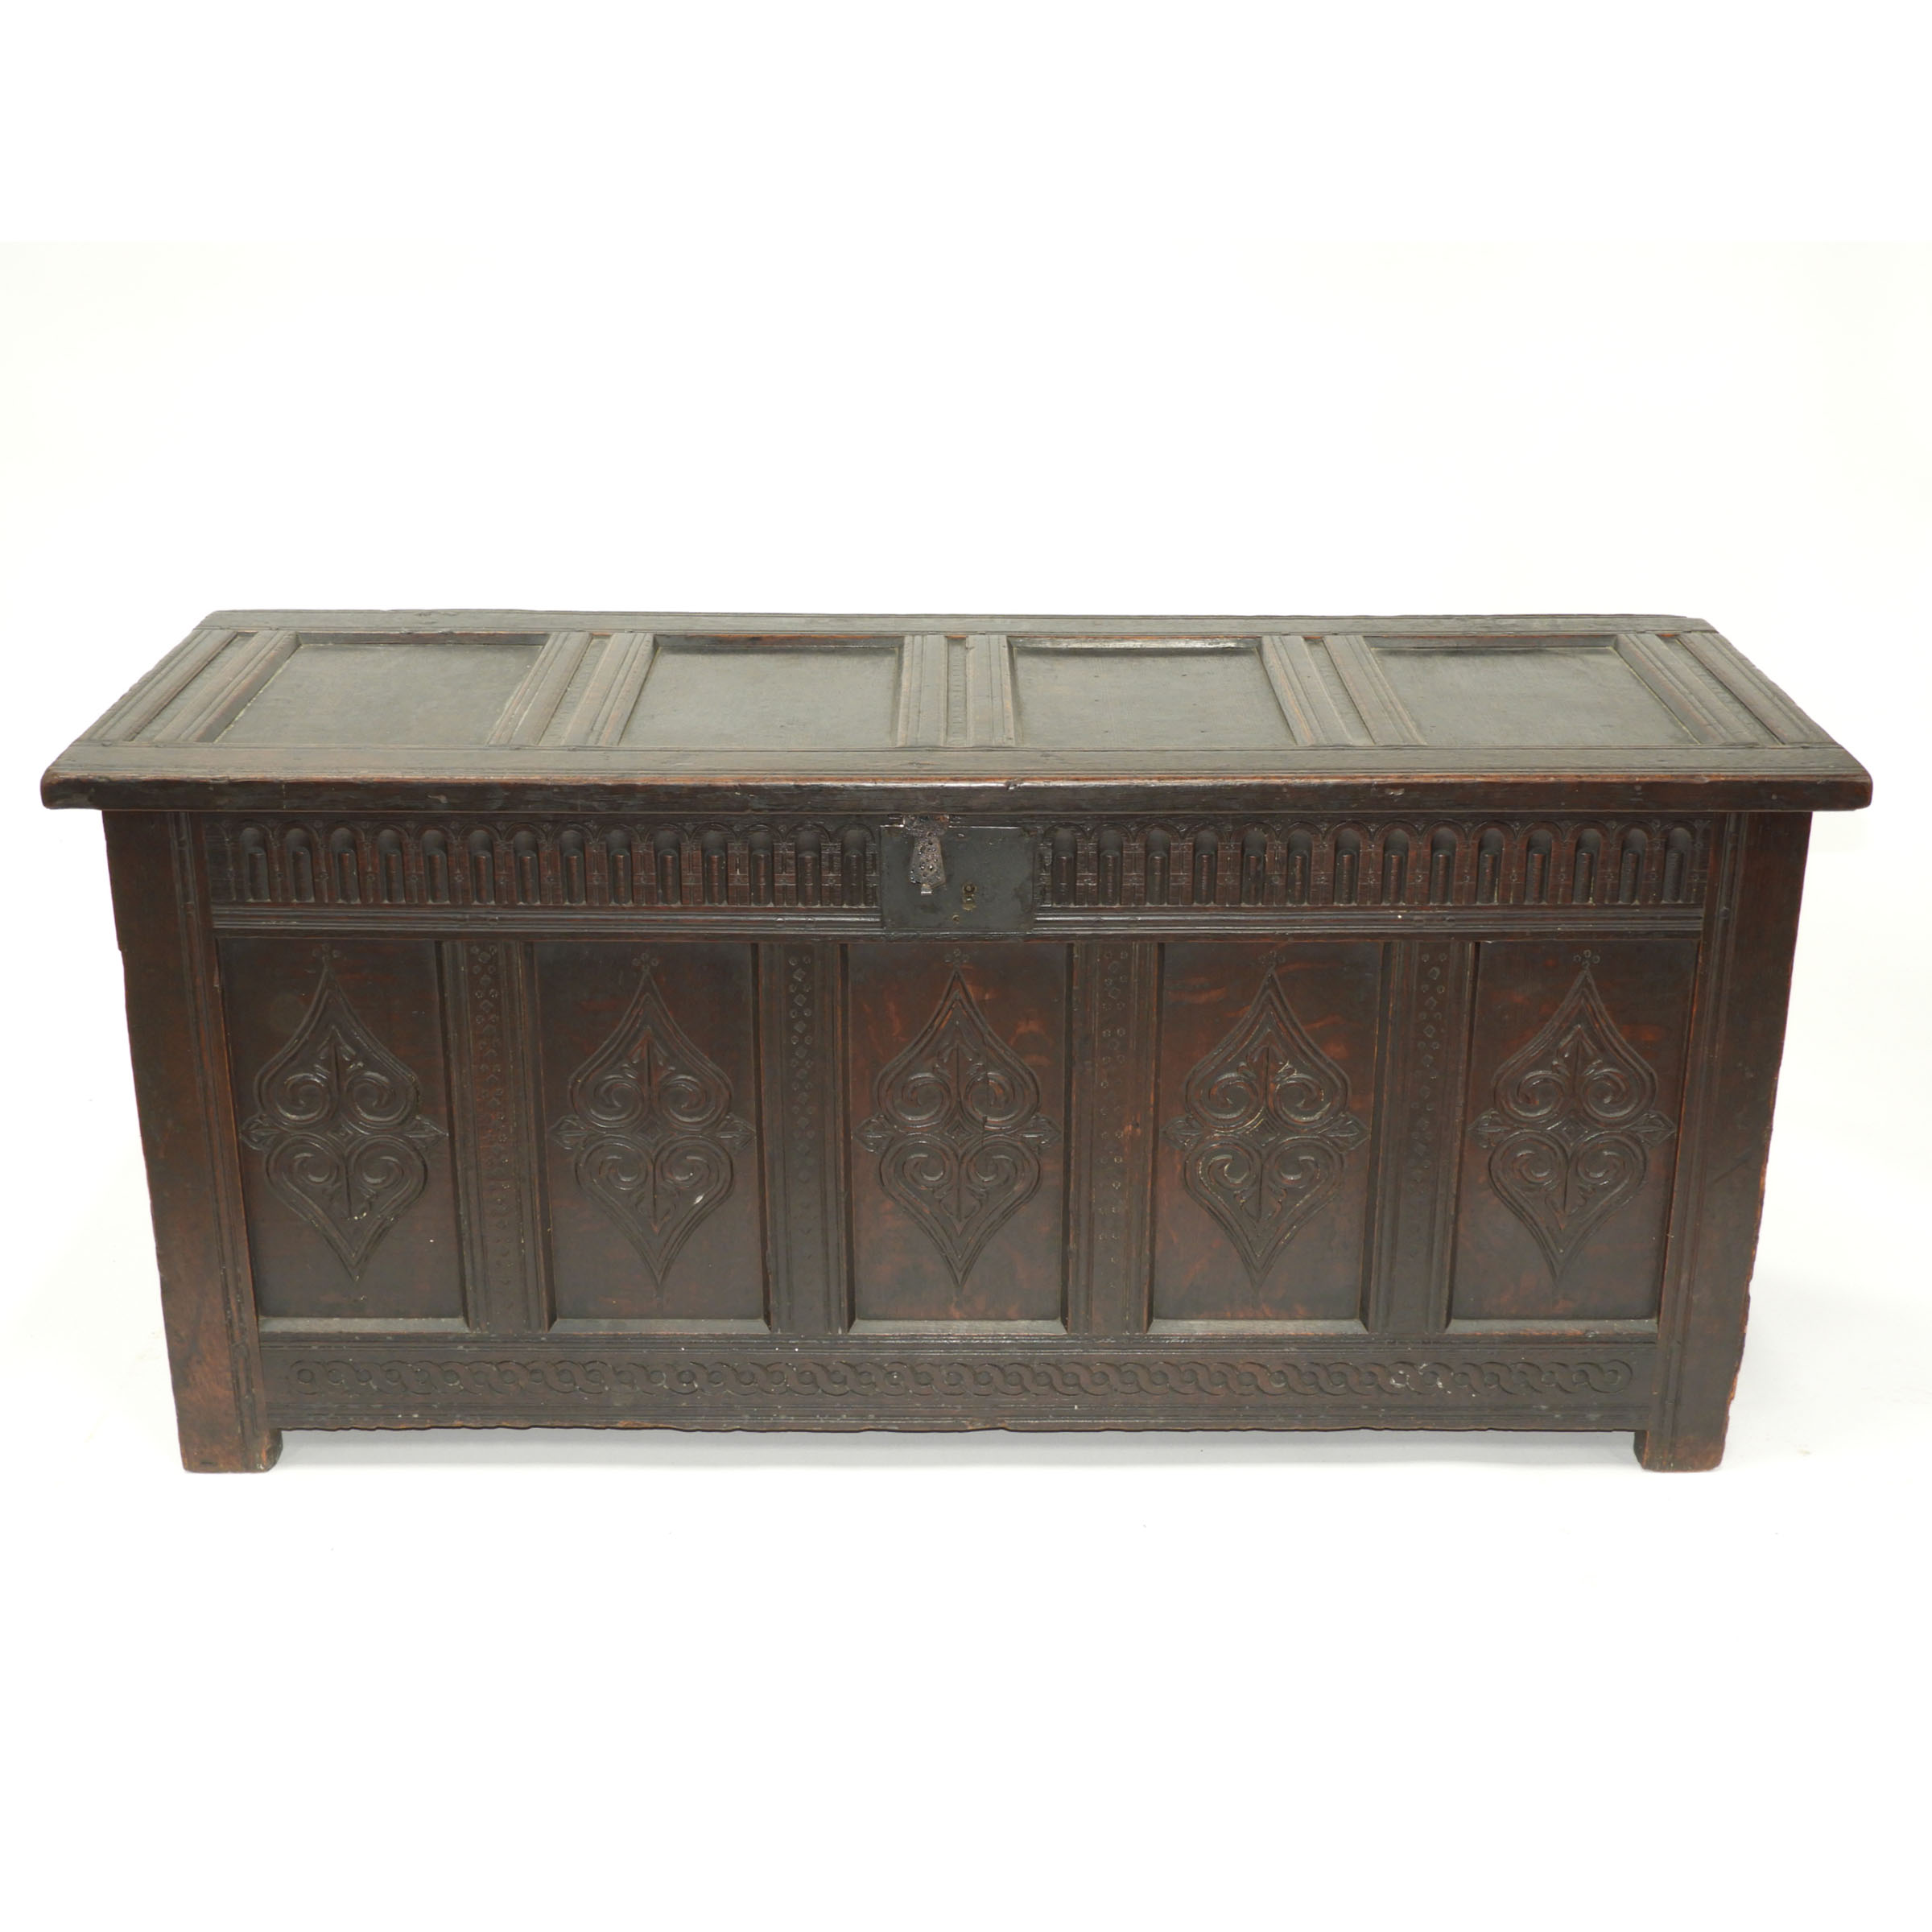 English Joined Oak Chest, 17th